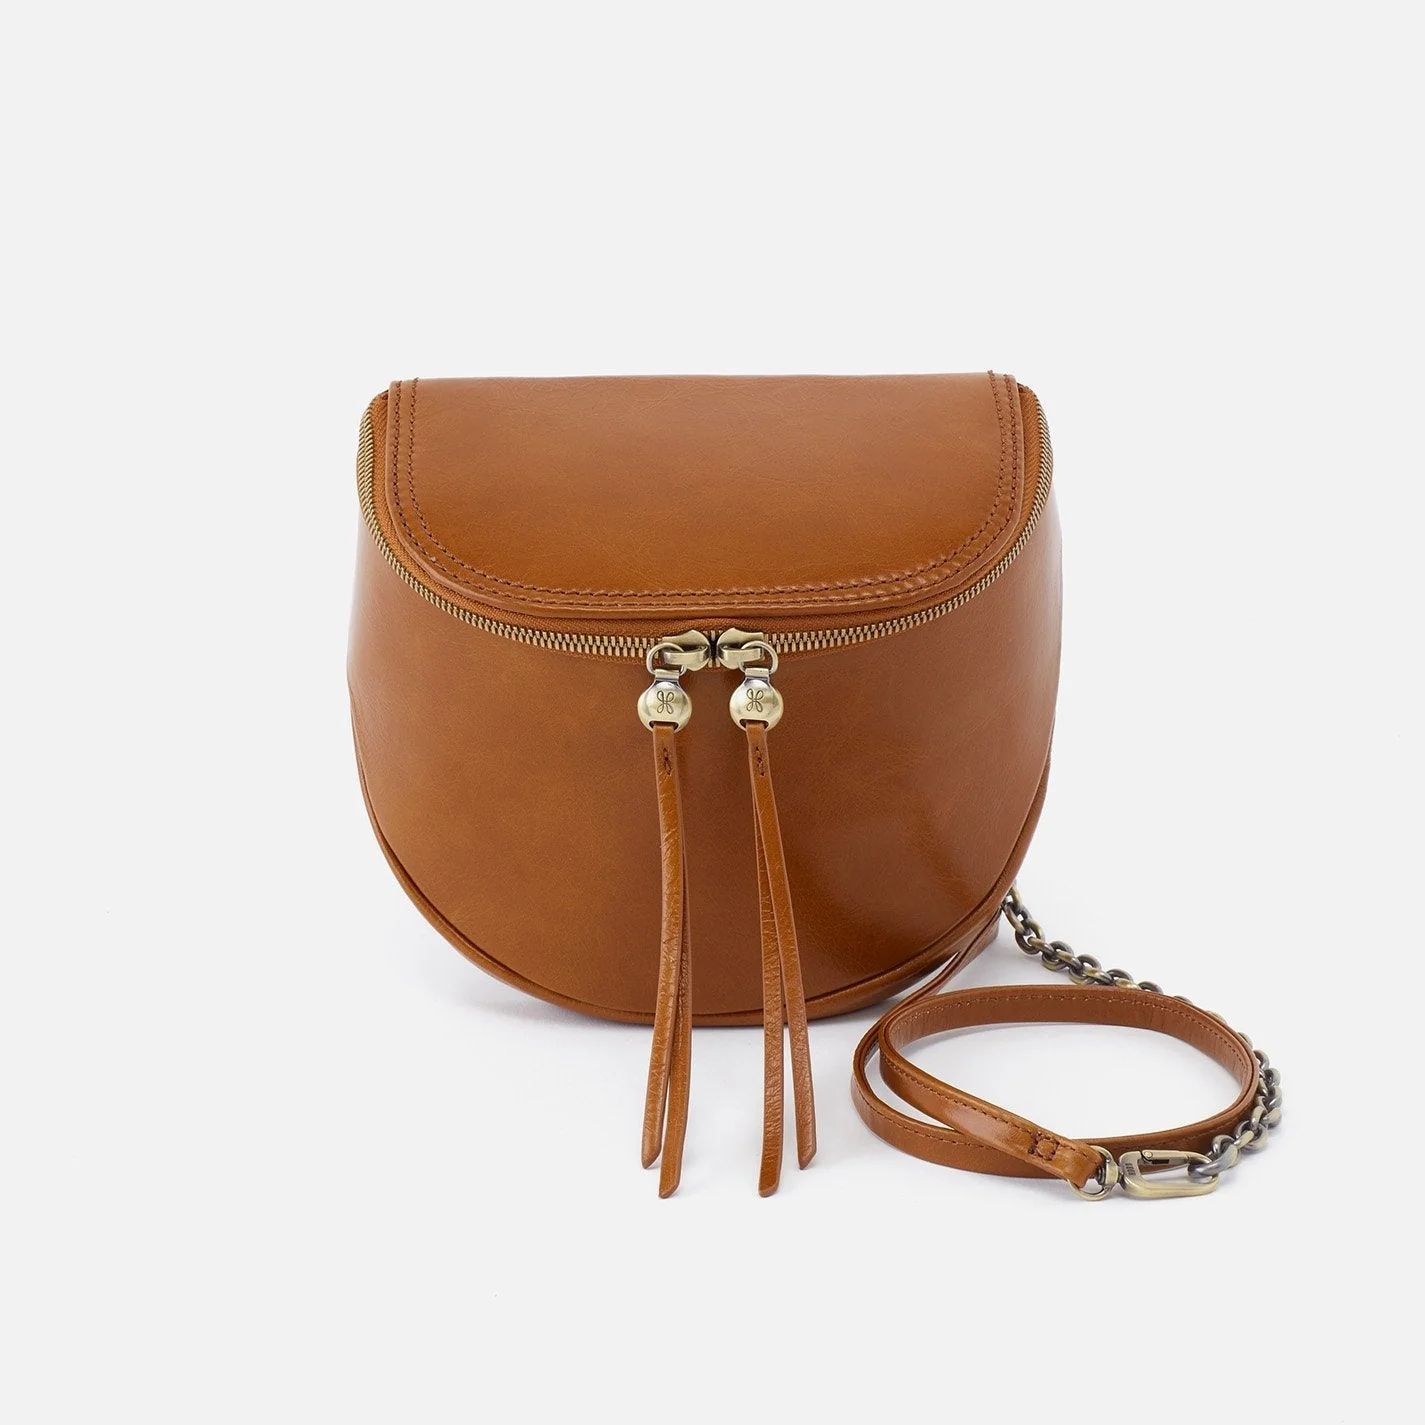 Foster Crossbody in Polished Leather - Truffle | HOBO Bags